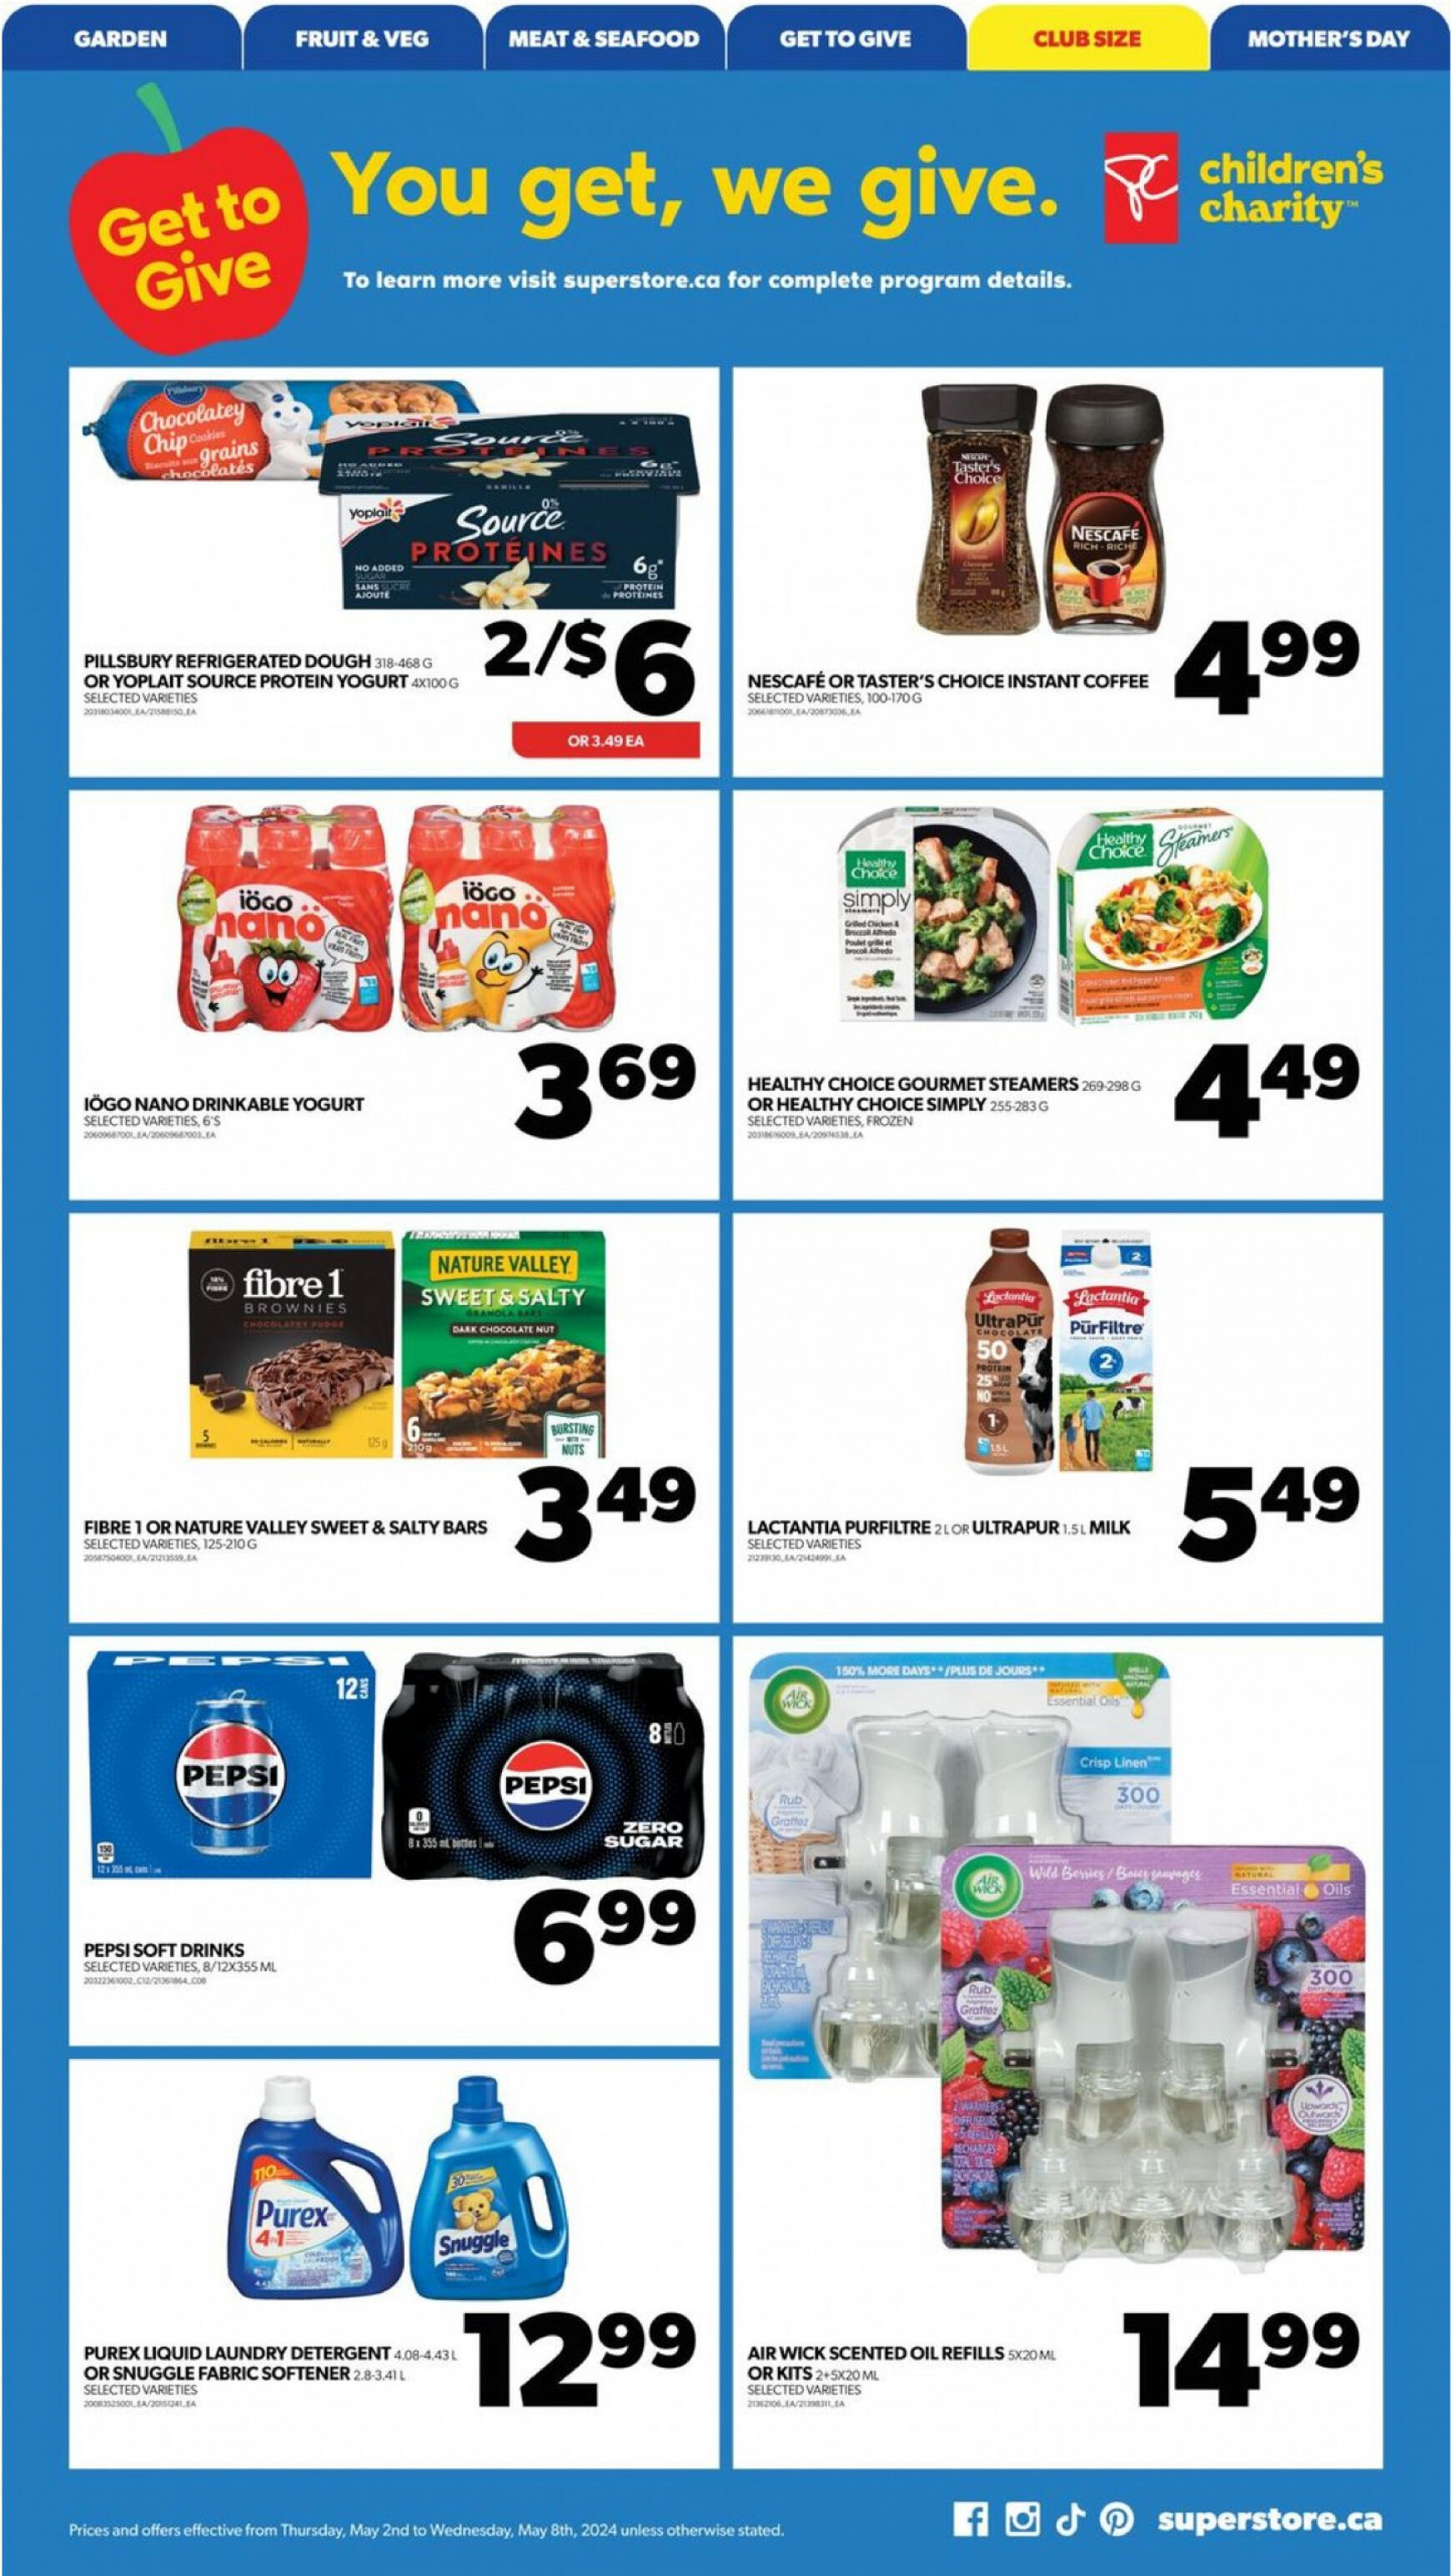 real-canadian-superstore - Real Canadian Superstore flyer current 02.05. - 08.05. - page: 15